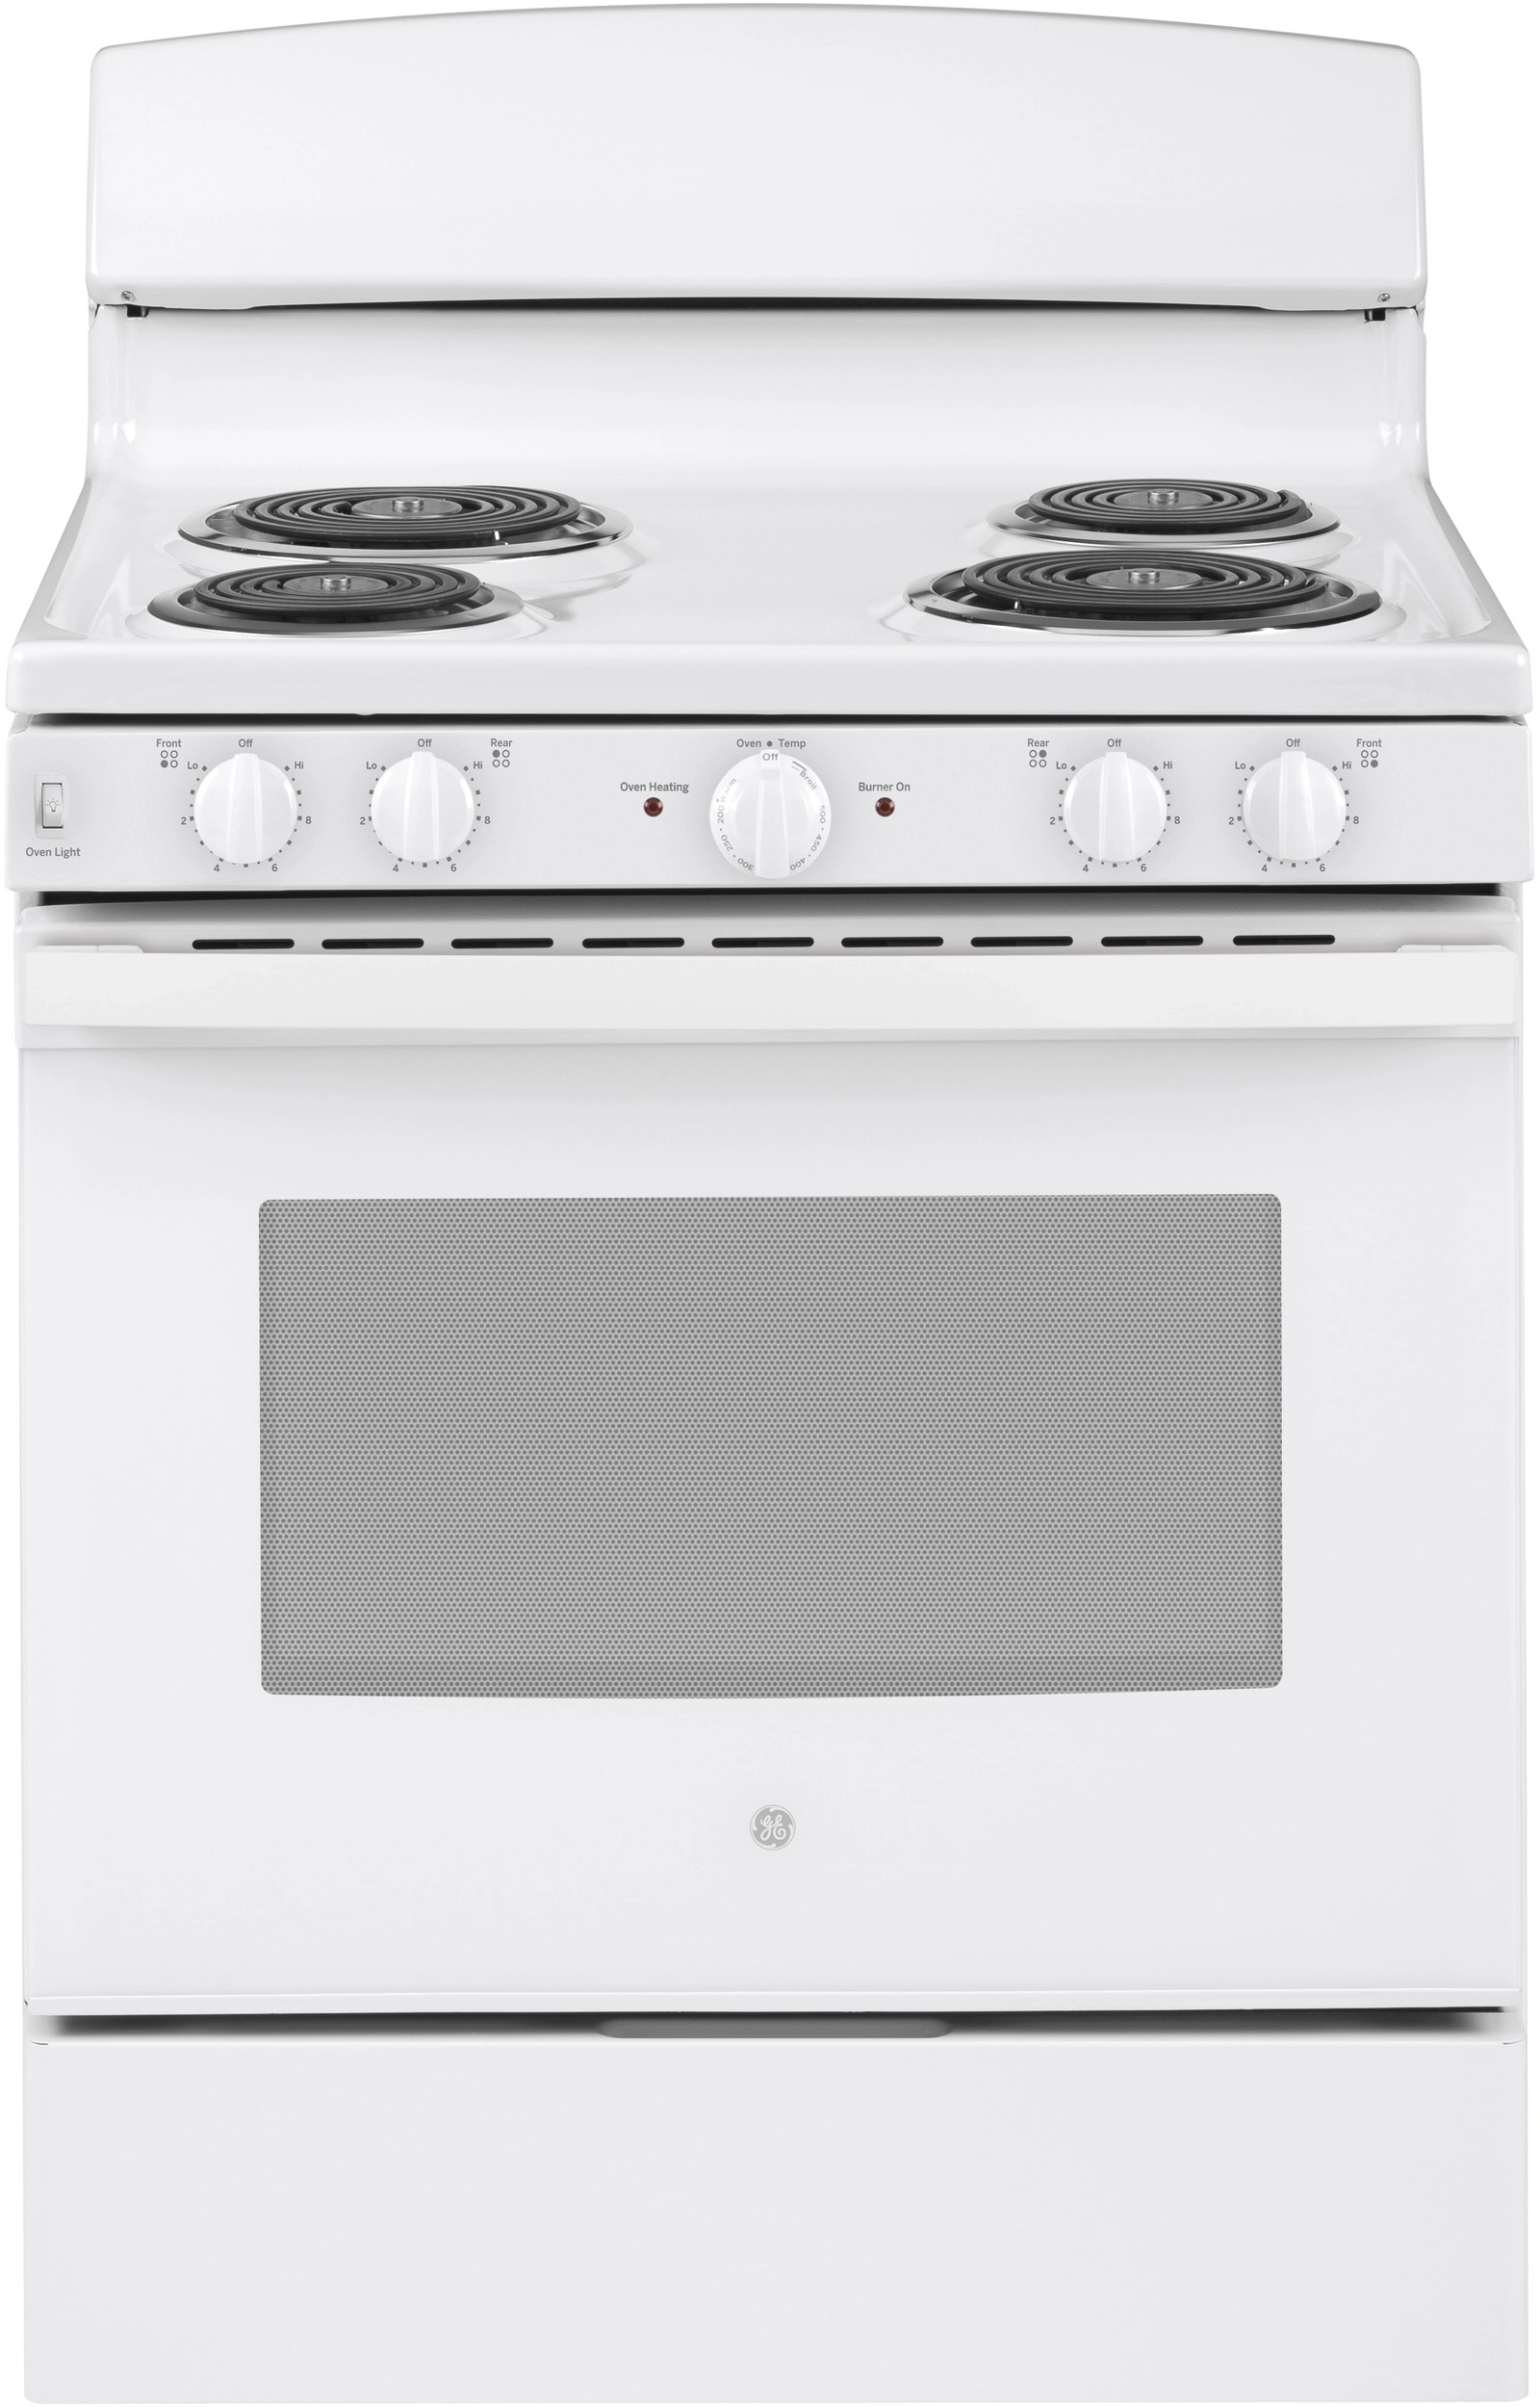 General Electric 30 Inch Freestanding Electric Range with Coil Burners